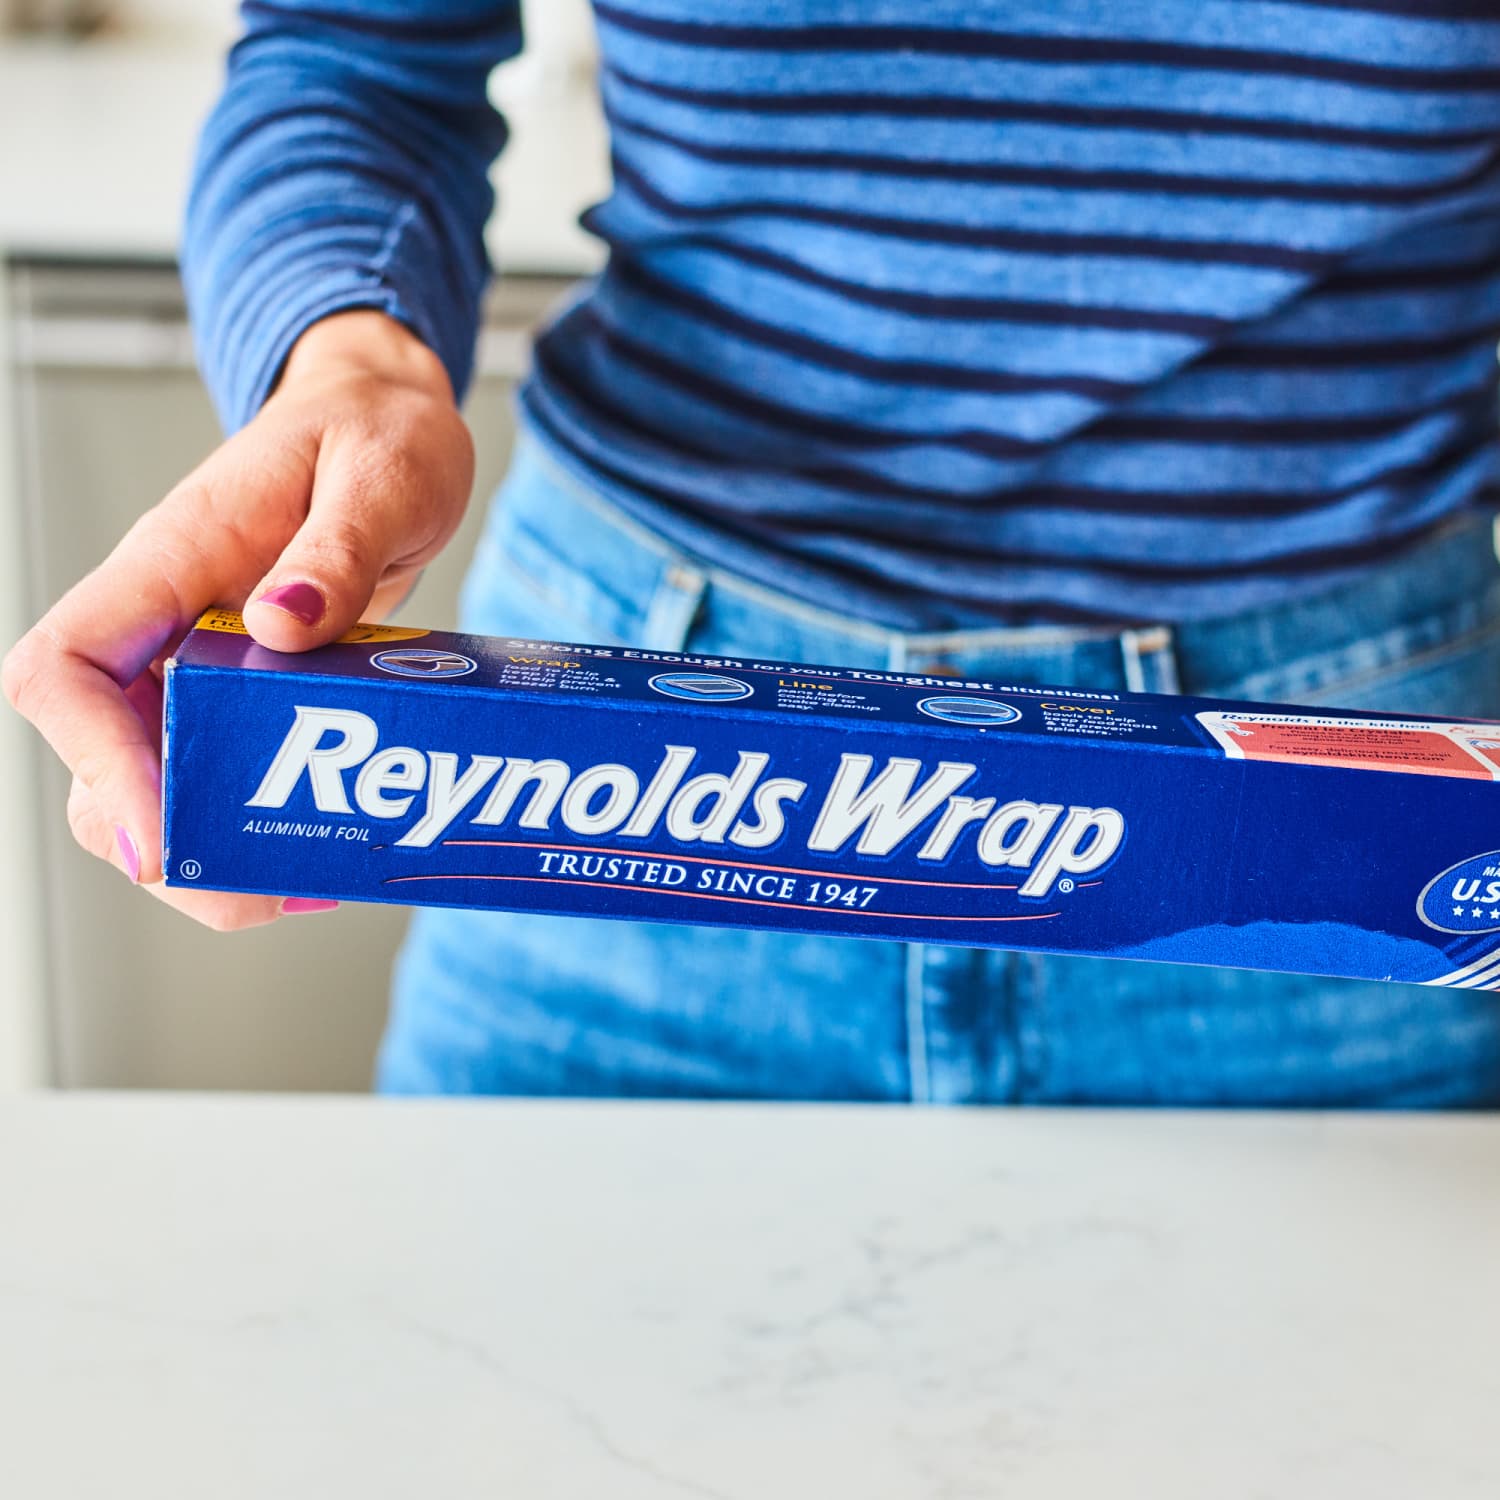 Reynolds Wrap Now Has an Easy Open and Close Tab